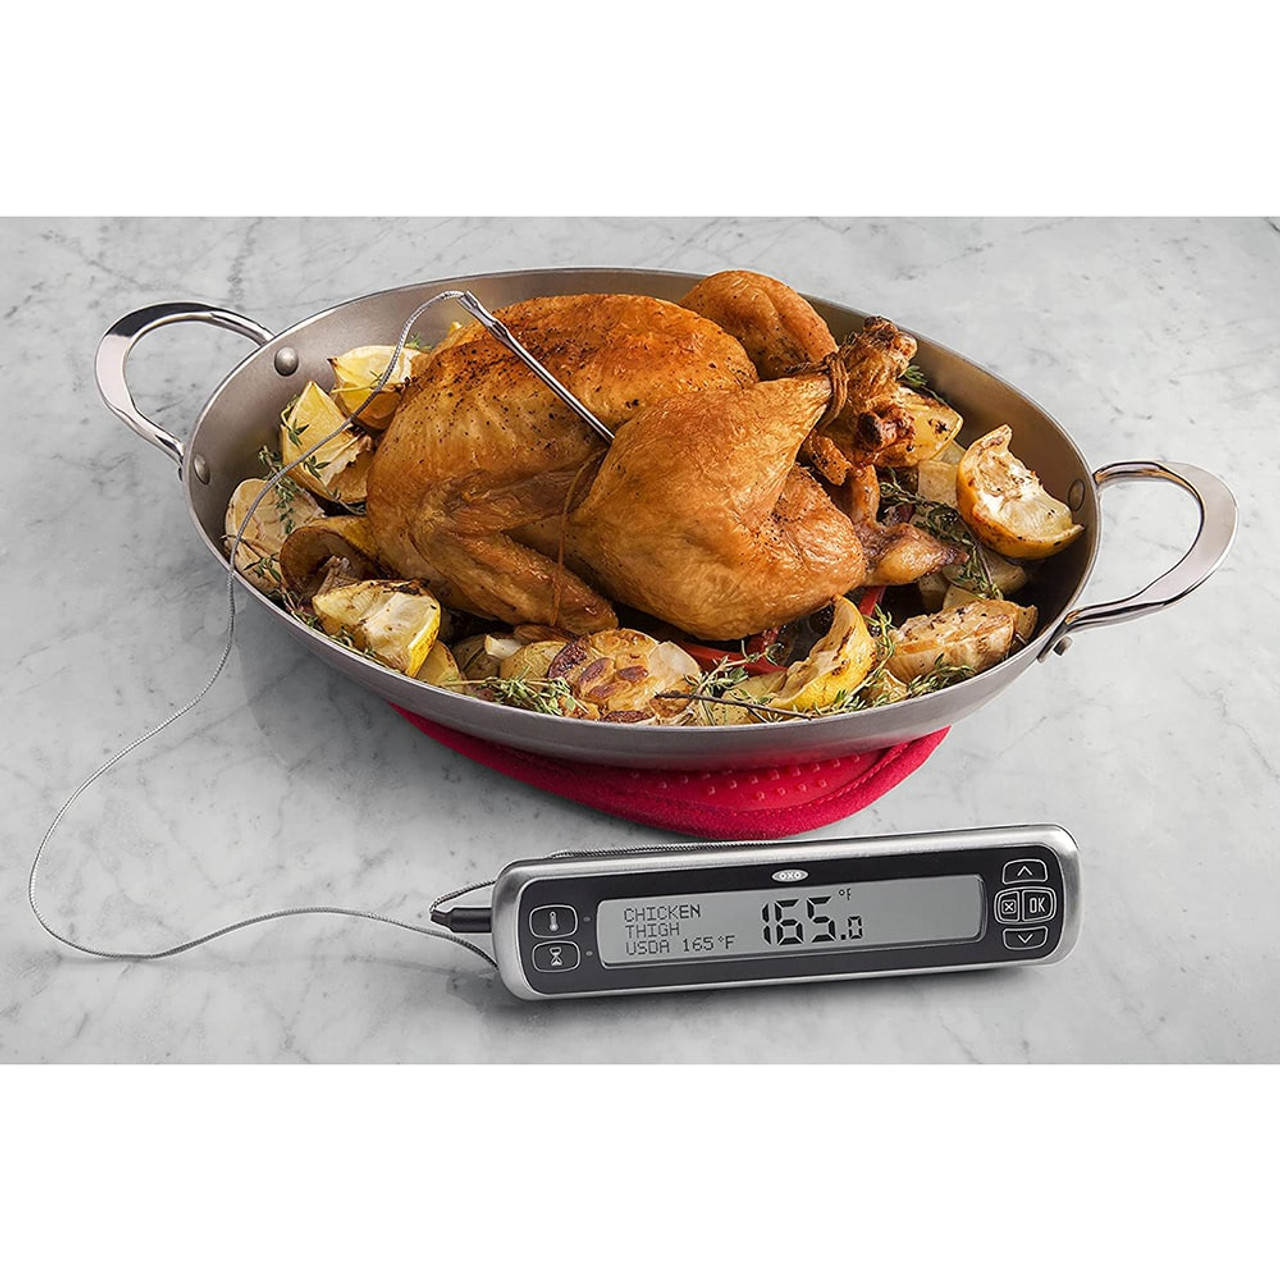 OXO Good Grips Digital Instant Read Thermometer Stainless Steel Poultry